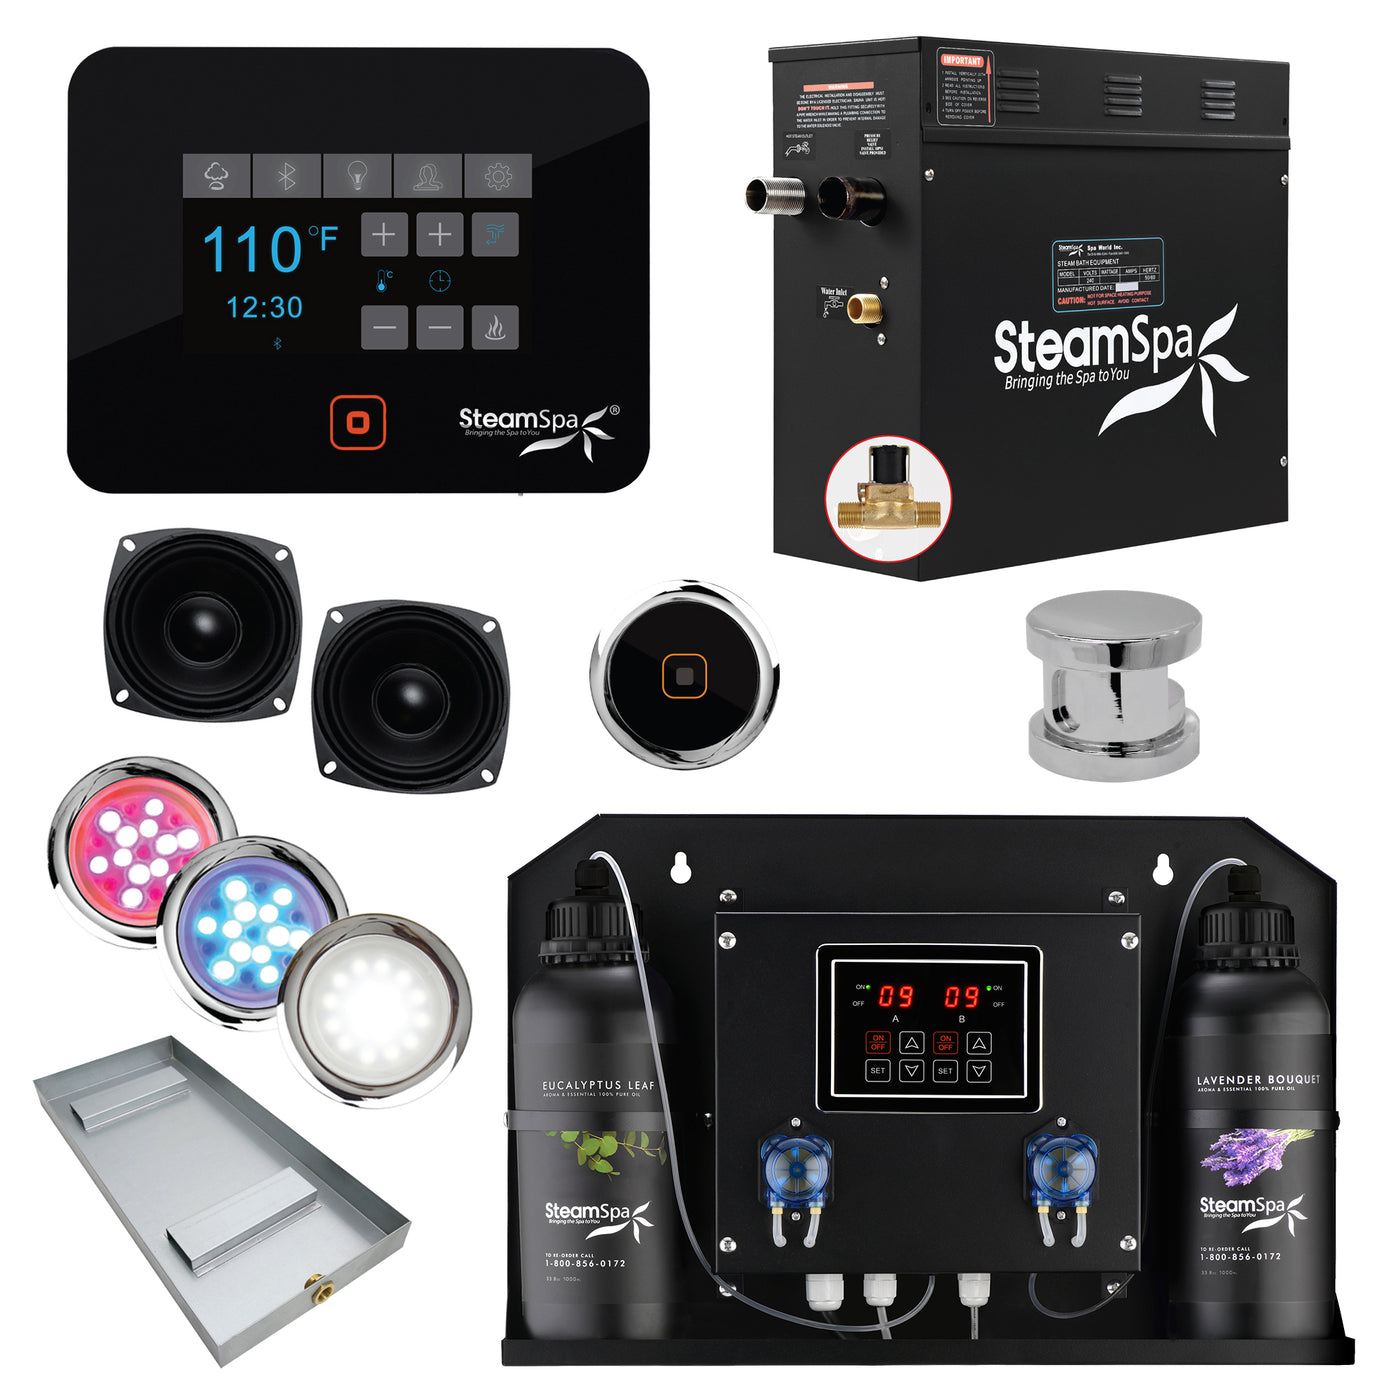 Black Series WiFi and Bluetooth 4.5kW QuickStart Steam Bath Generator Package with Dual Aroma Pump in Polished Chrome BKT450CH-ADP